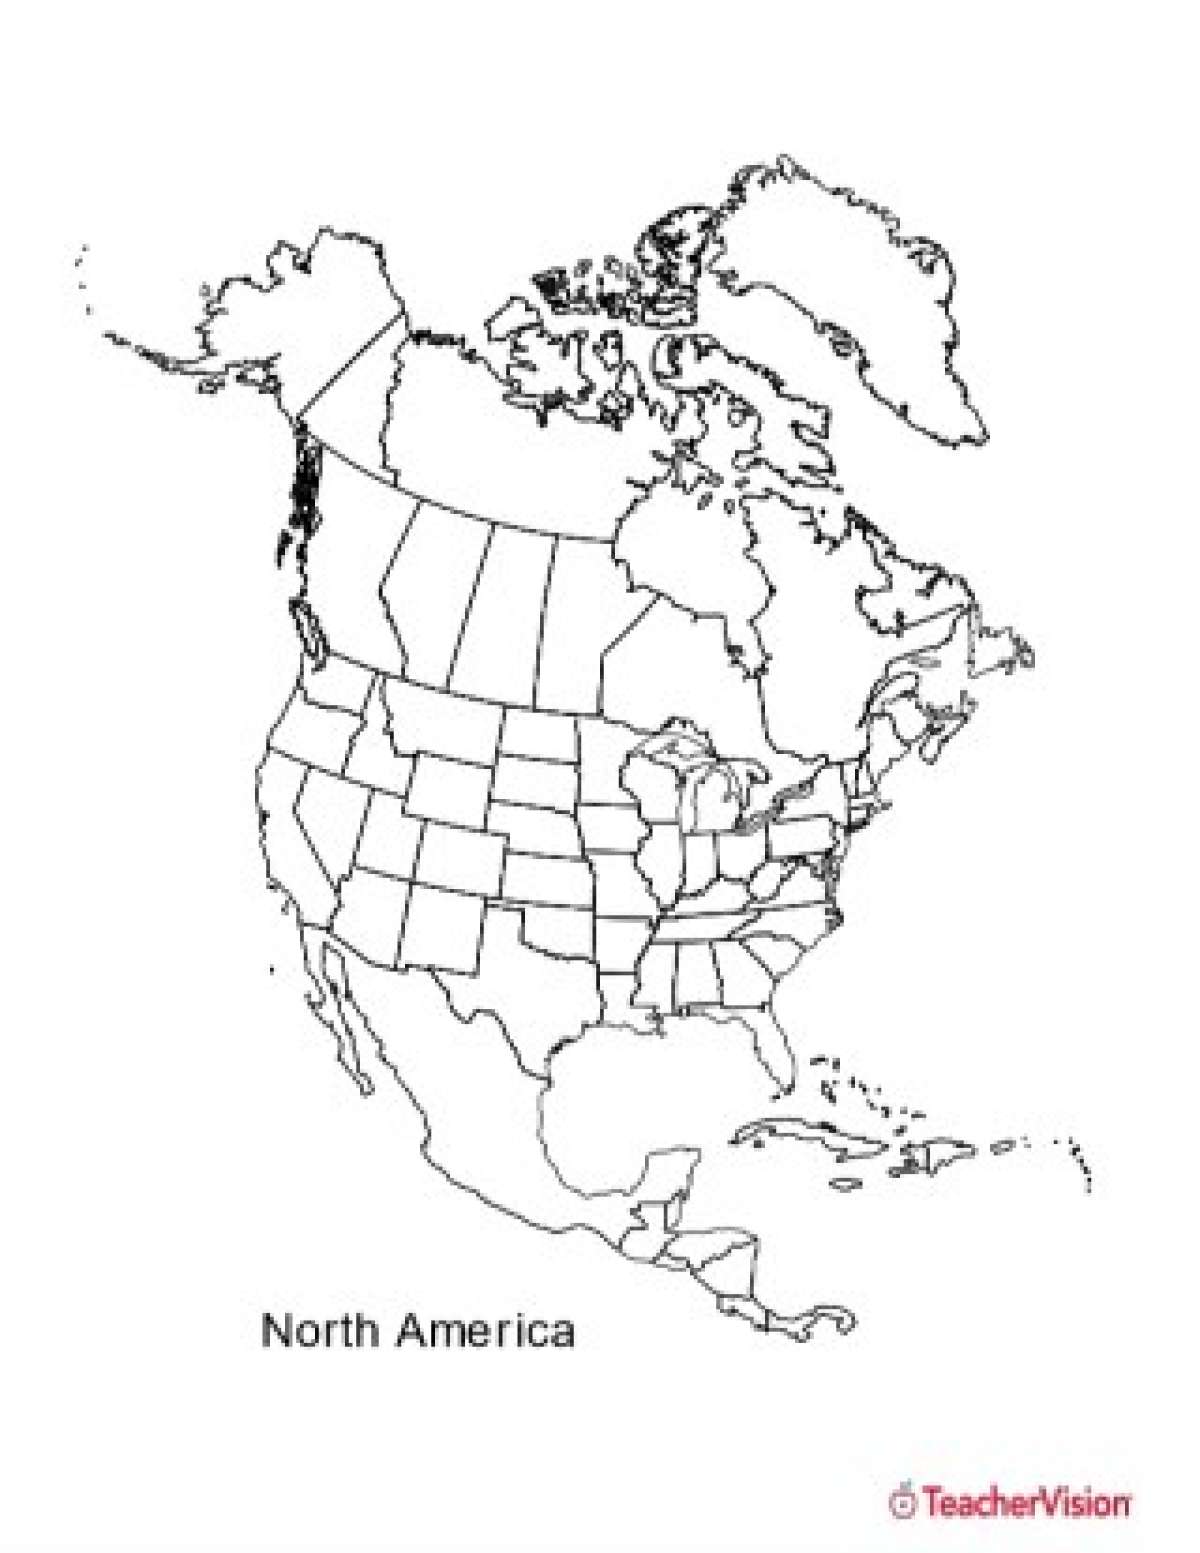 Black North America Logo - Outline Map of North America - FamilyEducation